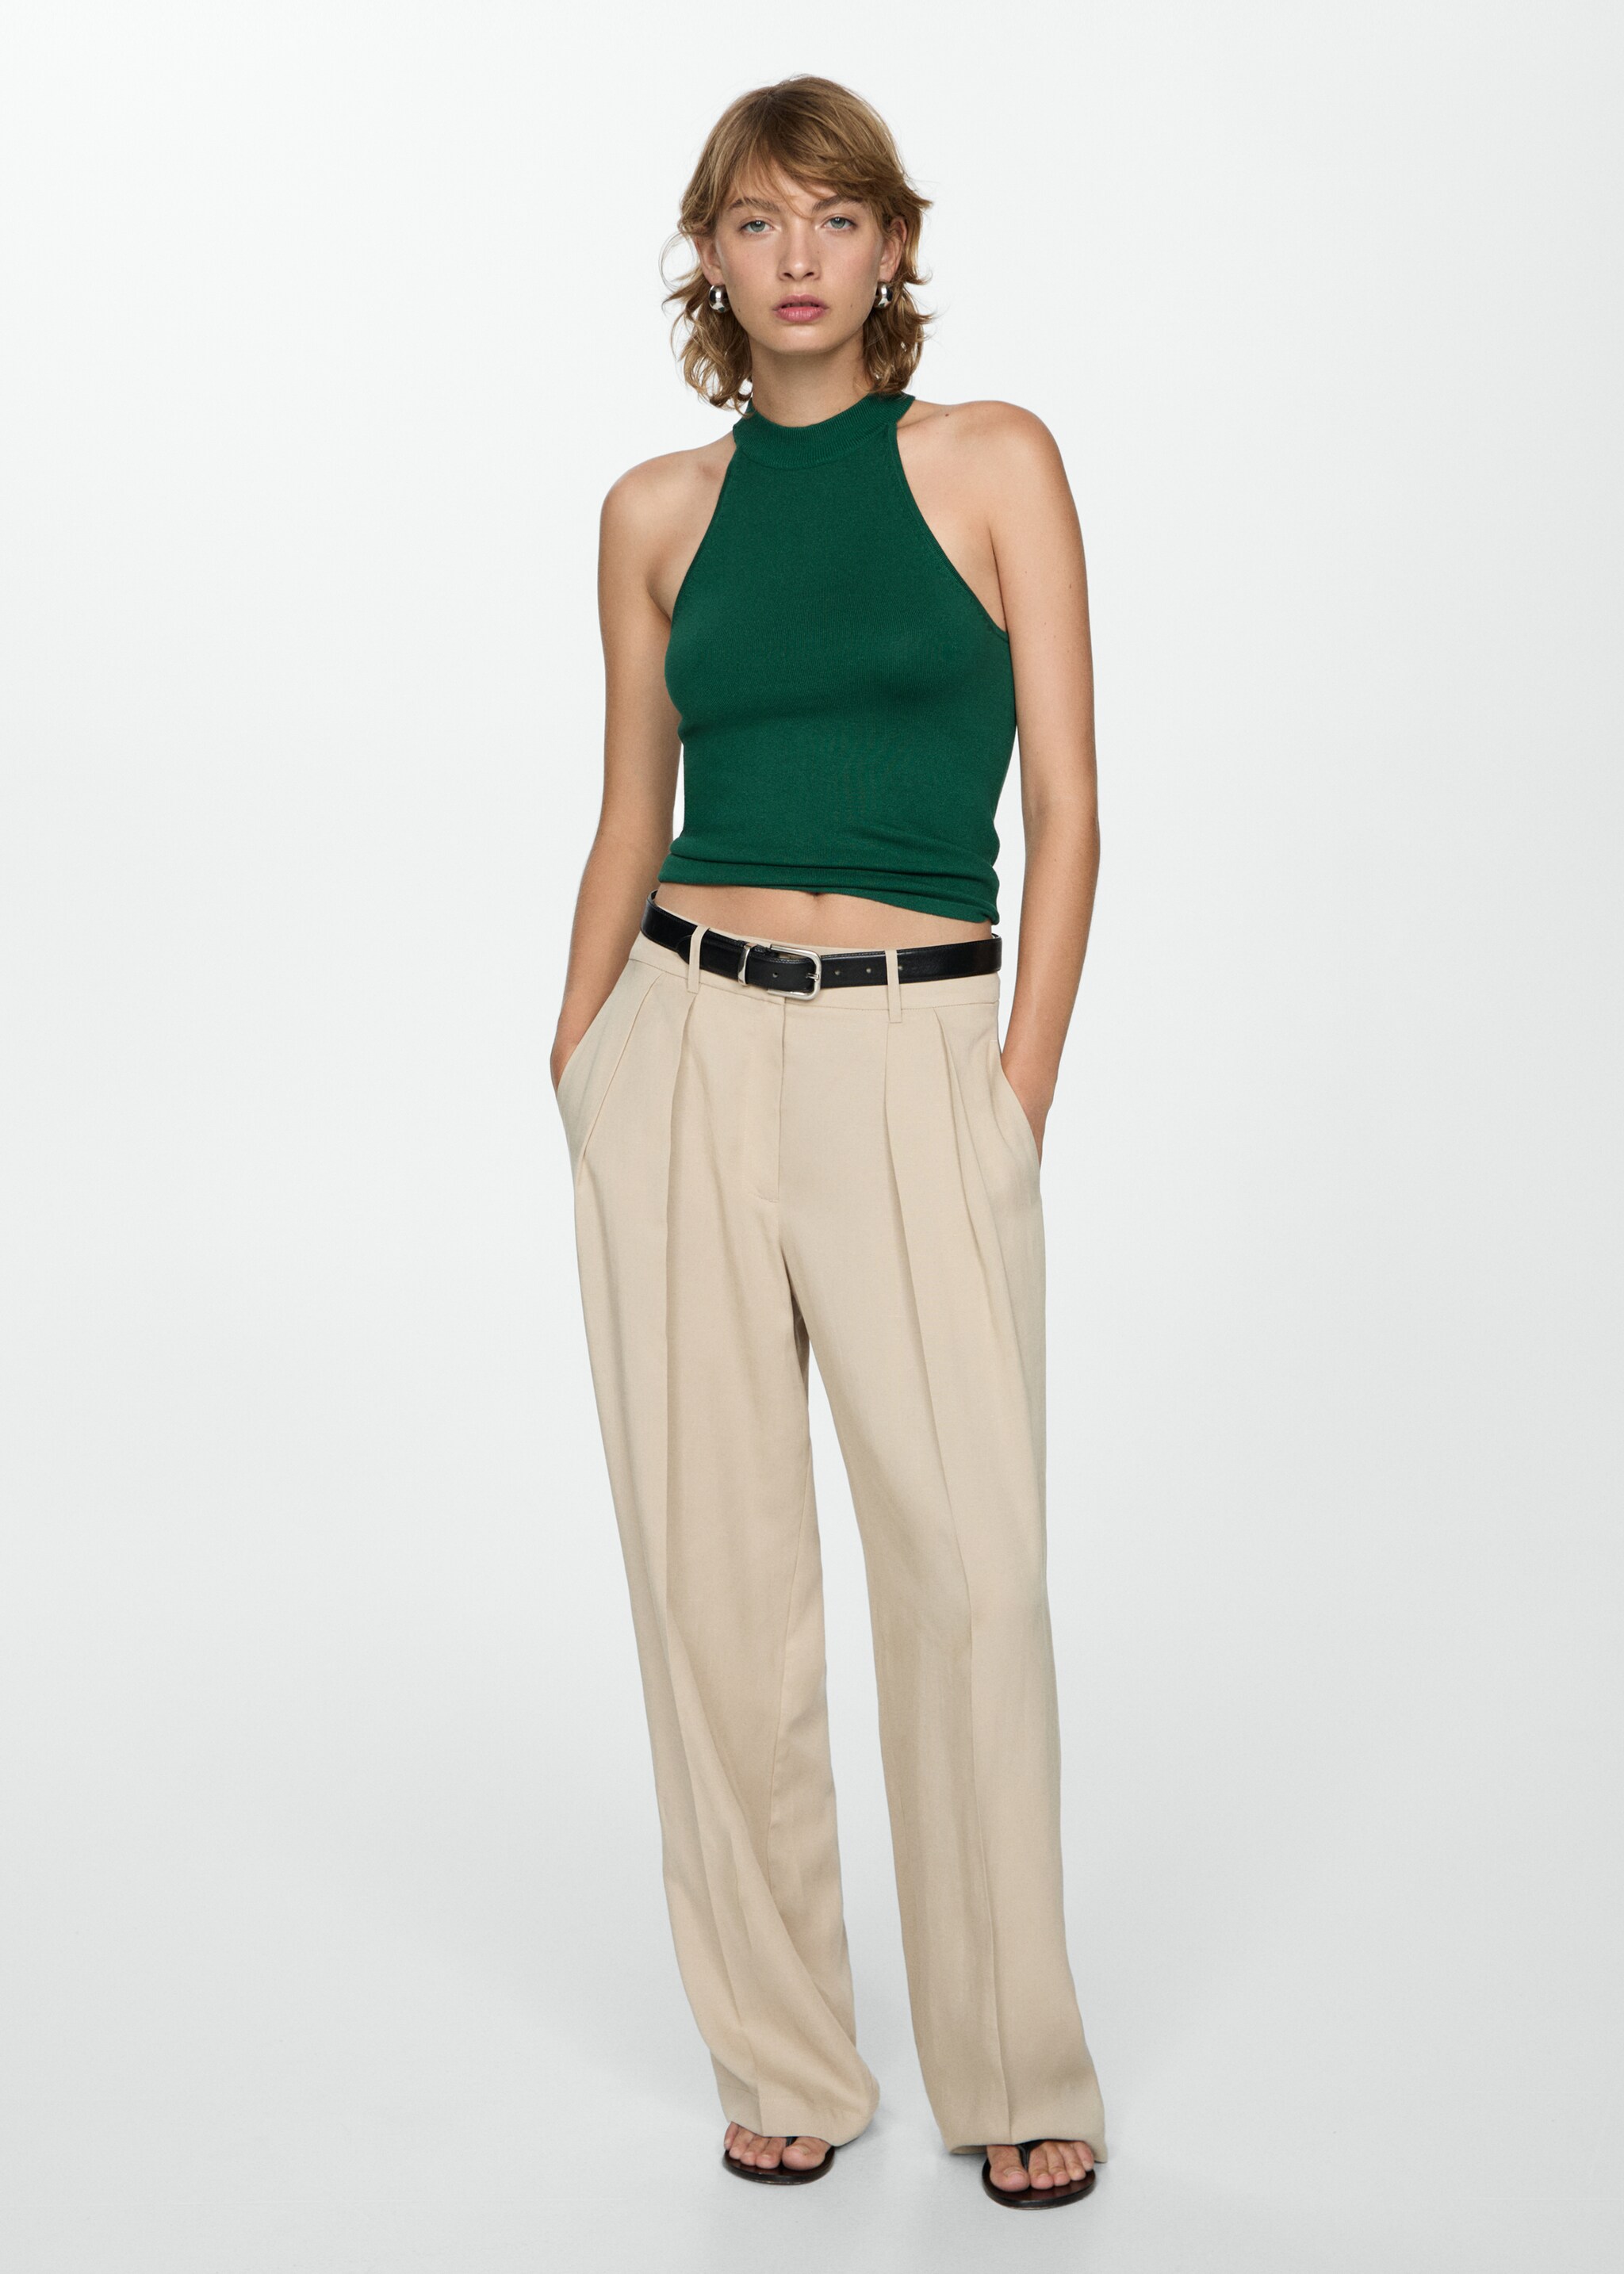 Halter-neck knitted top - General plane